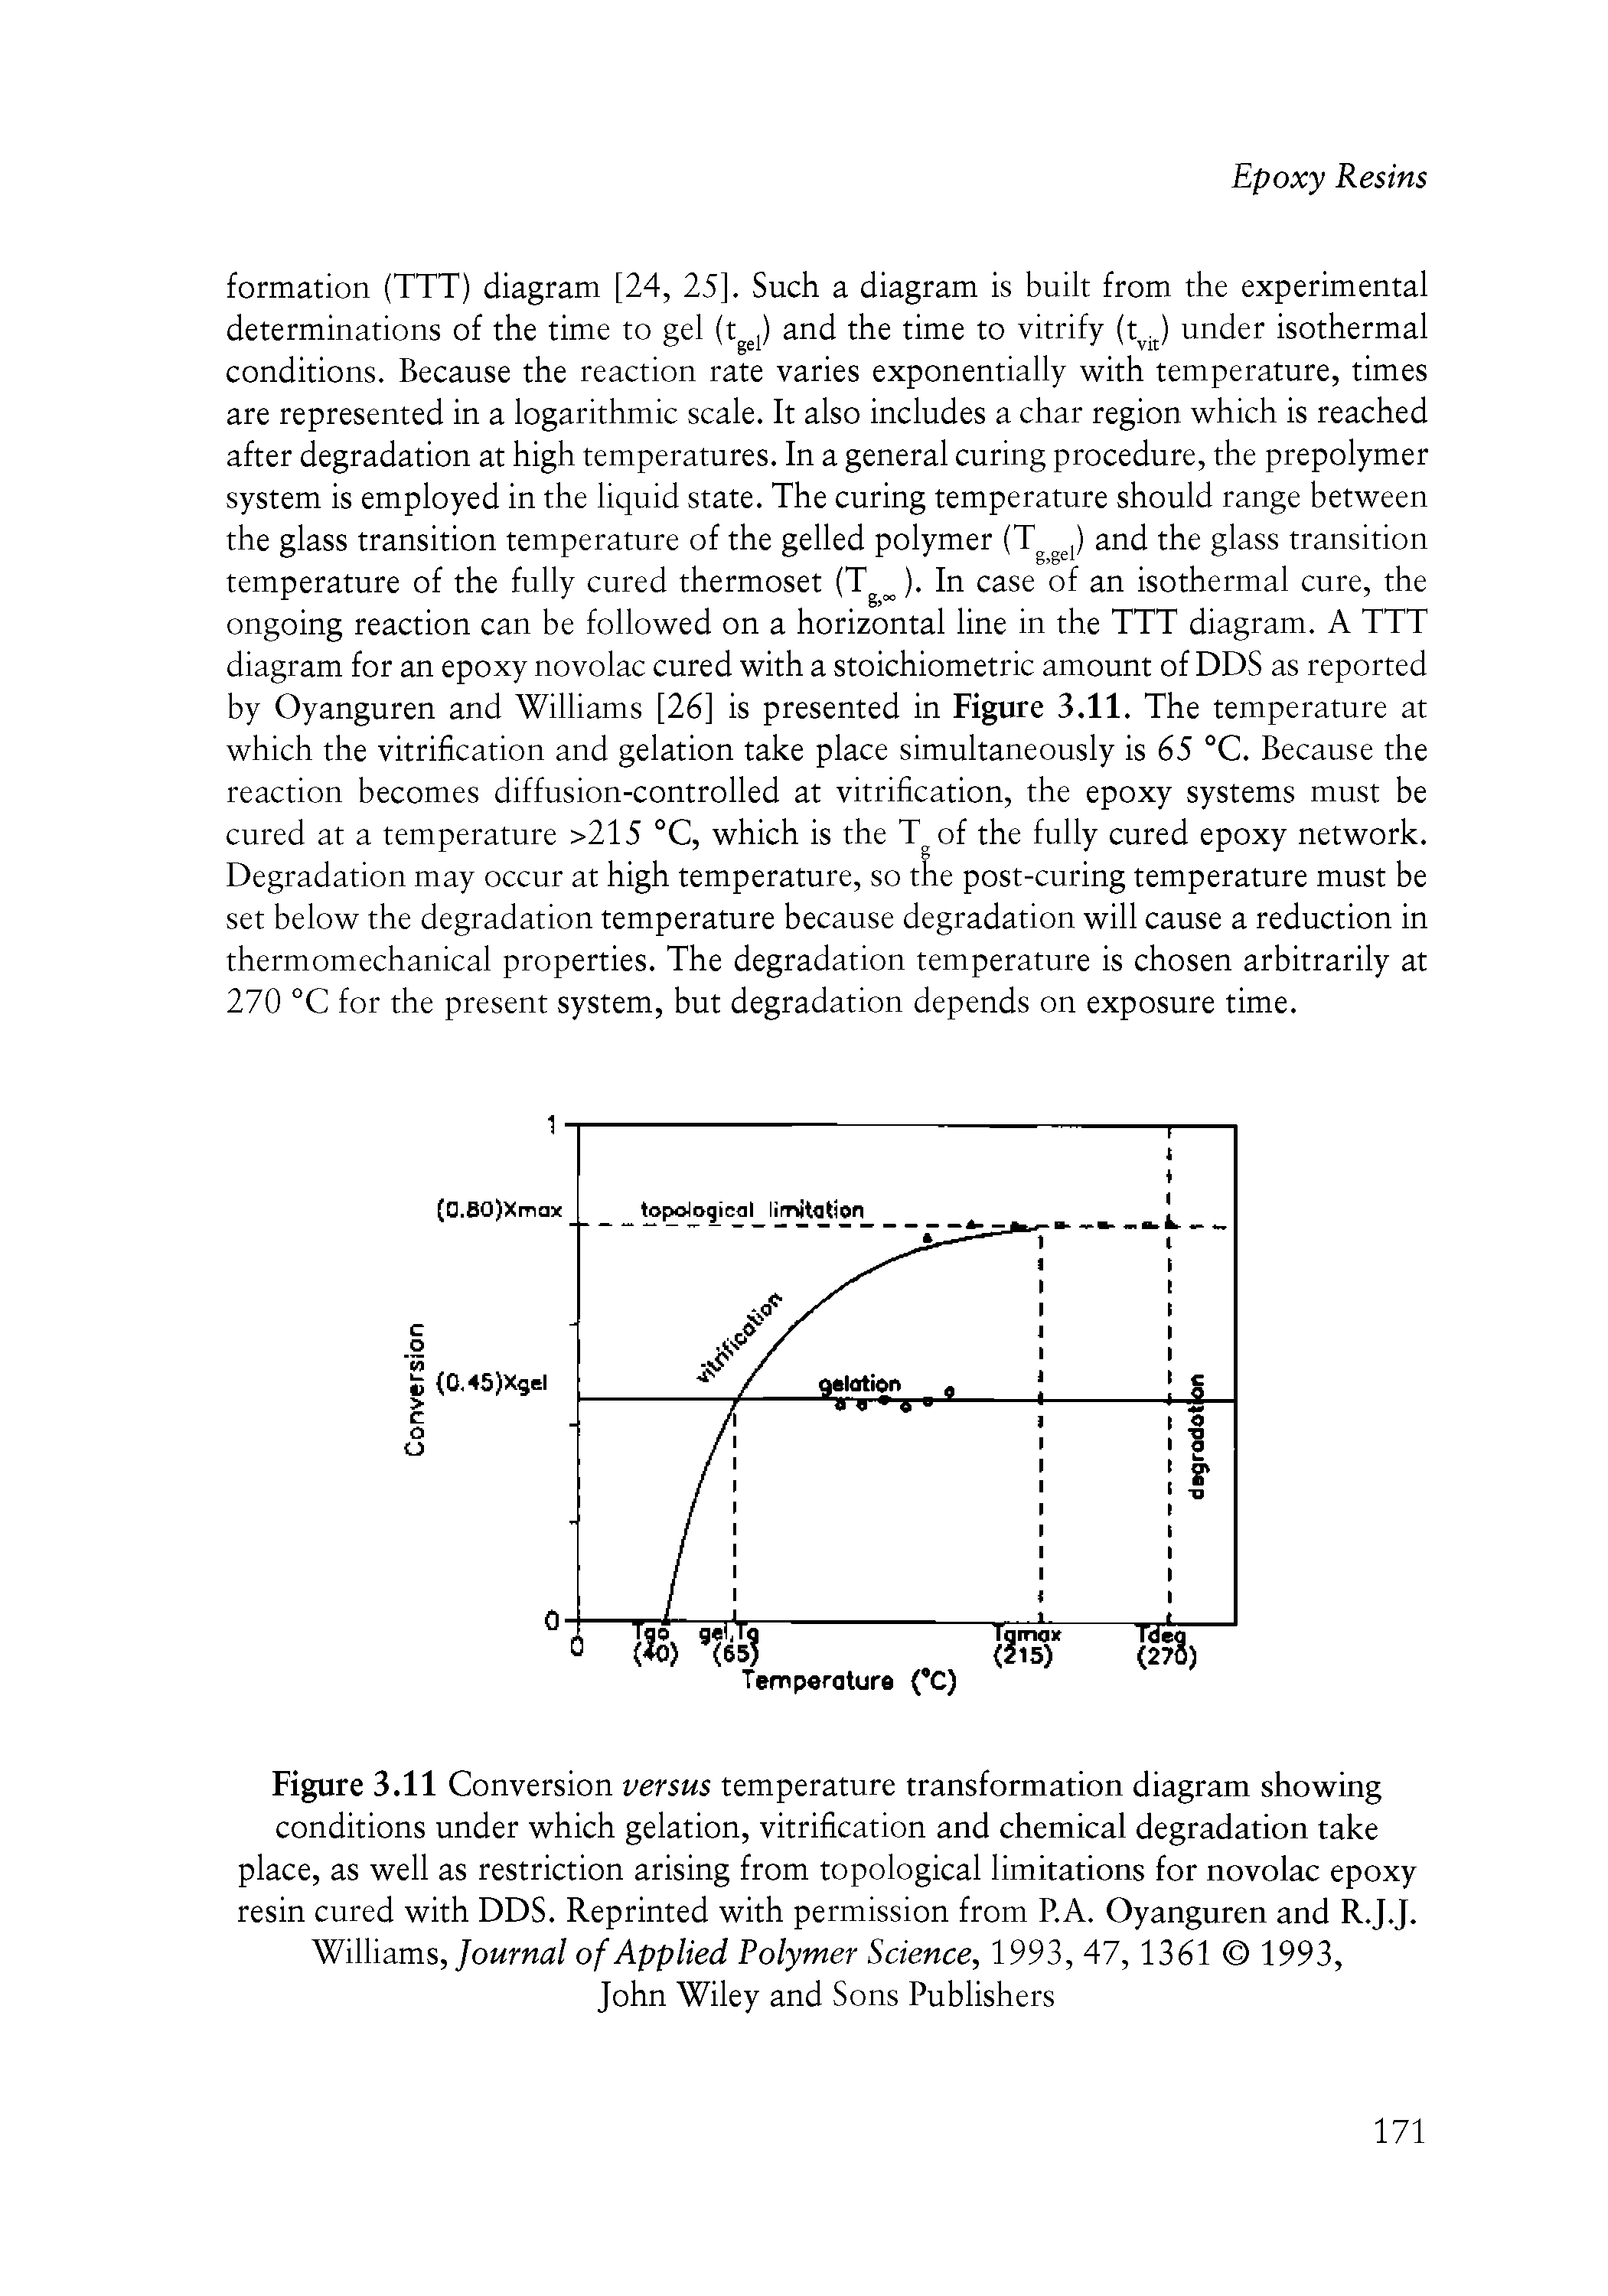 Figure 3.11 Conversion versus temperature transformation diagram showing conditions under which gelation, vitrification and chemical degradation take place, as well as restriction arising from topological limitations for novolac epoxy resin cured with DDS. Reprinted with permission from RA. Oyanguren and R.J.J. Williams,/owmia/ of Applied Polymer Science, 1993, 47,1361 1993,...